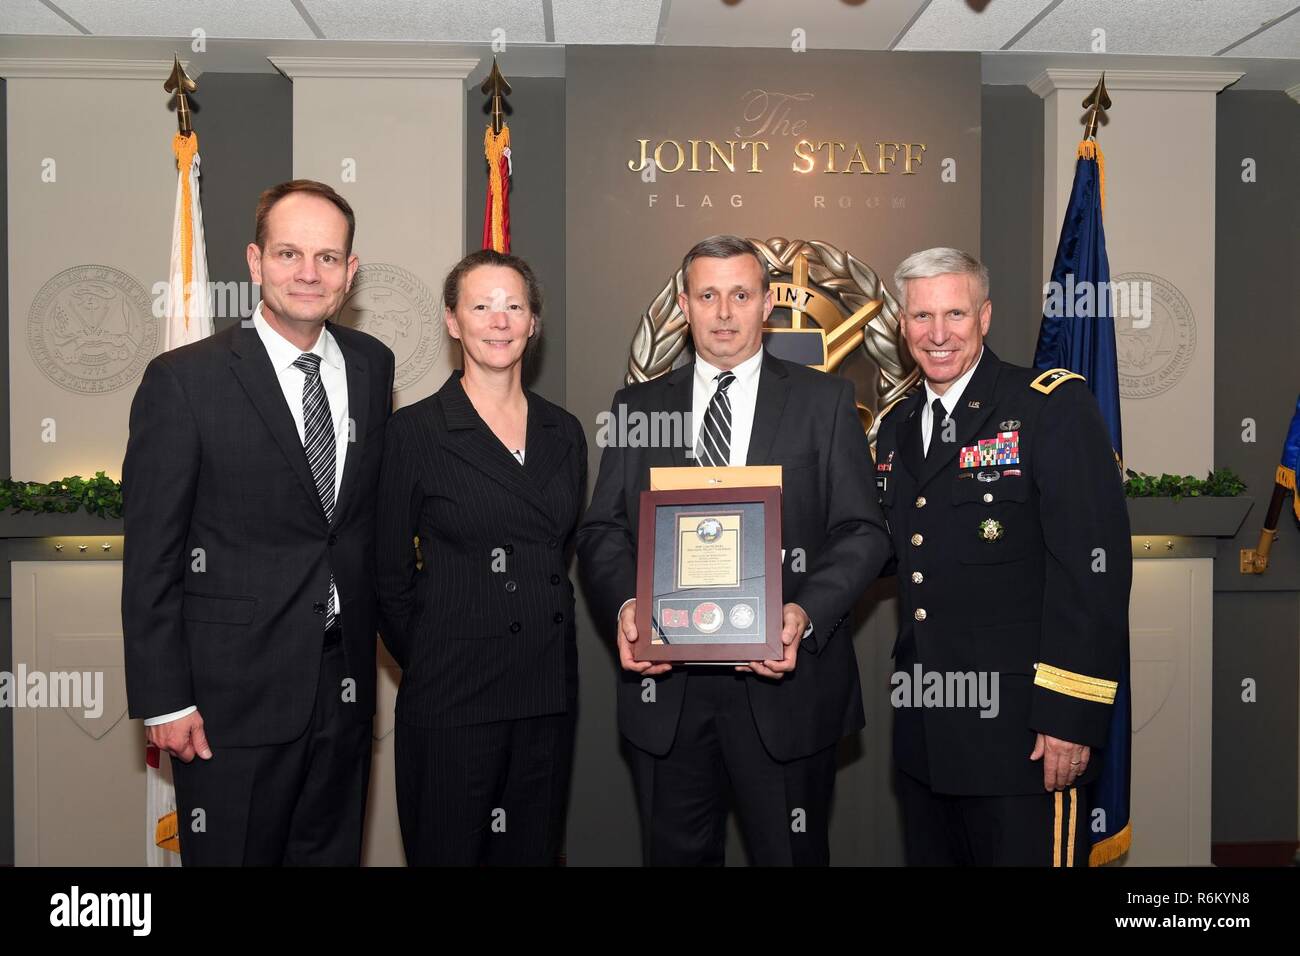 Karl F. Schneider (Left), senior career official performing the duties of the Under Secretary of the Army, host of the 2016 Lean Six Sigma excellence awards program ceremony May 18, 2017 at the Pentagon in Arlington, Va., poses with Diane Parks (Second from left), U.S. Army Corps of Engineers Nashville District chief of Operations, Tim Dunn (Third from left), Nashville District deputy chief of Operations, and Maj. Gen. Richard L. Stevens, U.S. Army Corps of Engineers deputy commanding general. Parks and Dunn accepted the Army’s Lean Six Sigma Award Program Process Improvement Project Team Exce Stock Photo